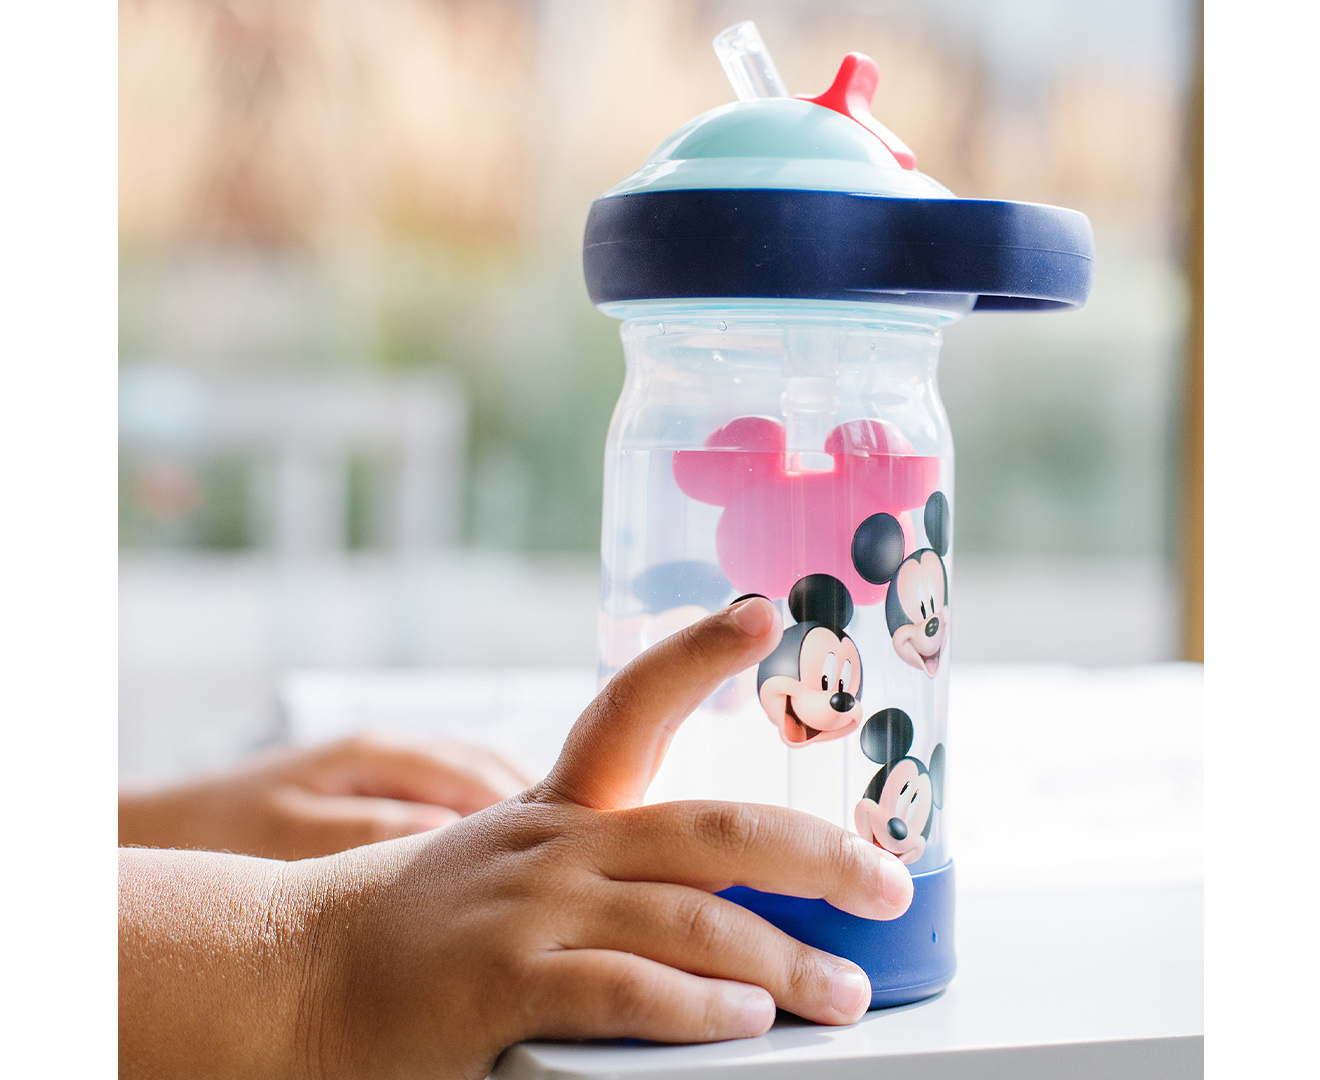 The First Years Disney Frozen Sip & See Toddler Water Bottle with Floating Charm, 12 oz